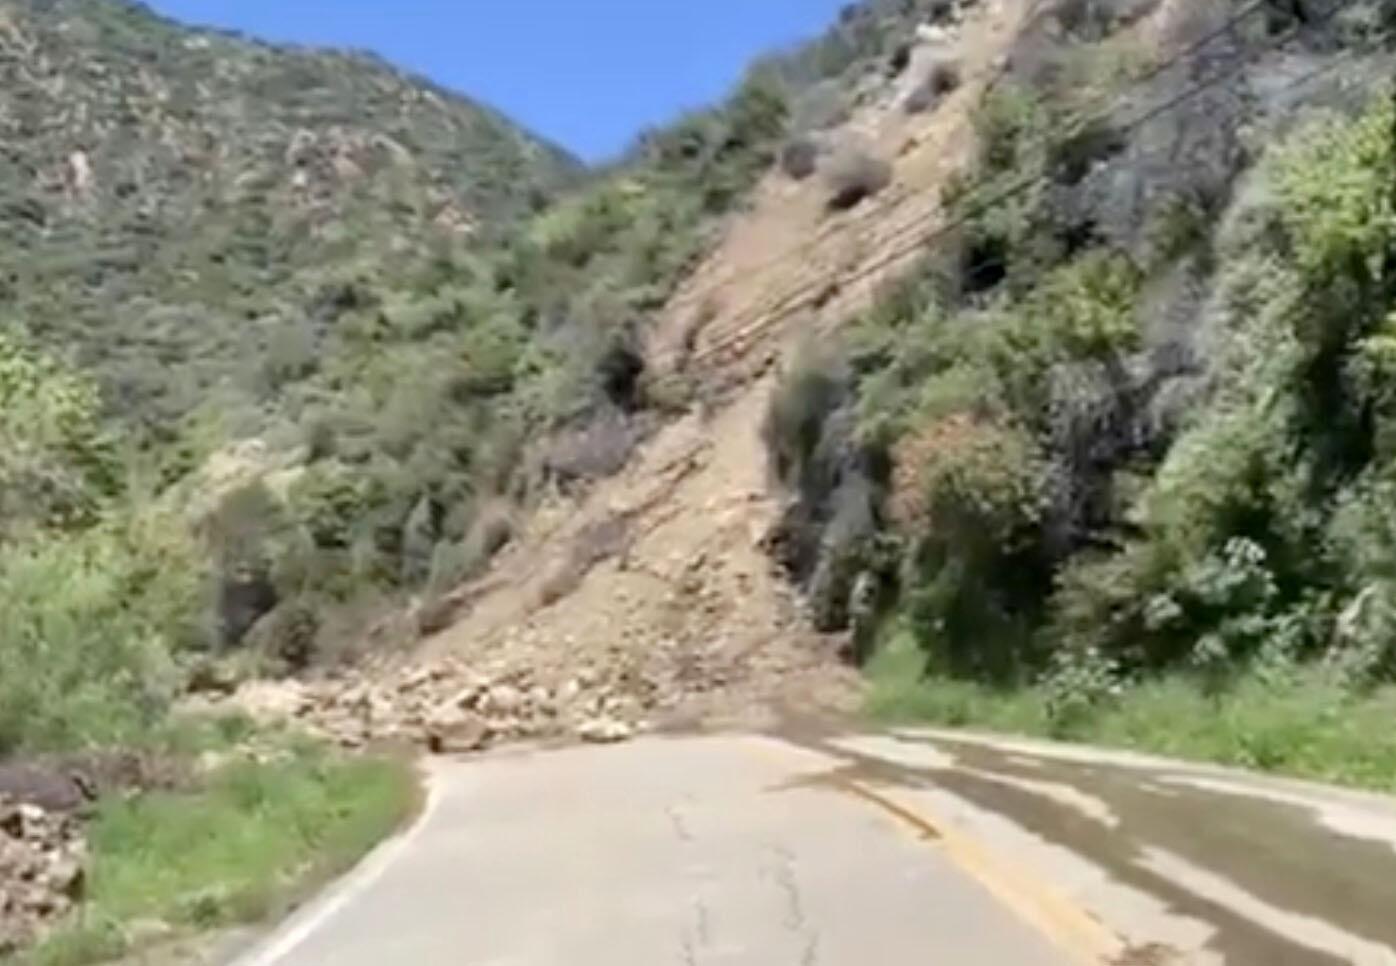 topanga-canyon-still-closed-by-landslide,-won’t-be-cleared-till-fall